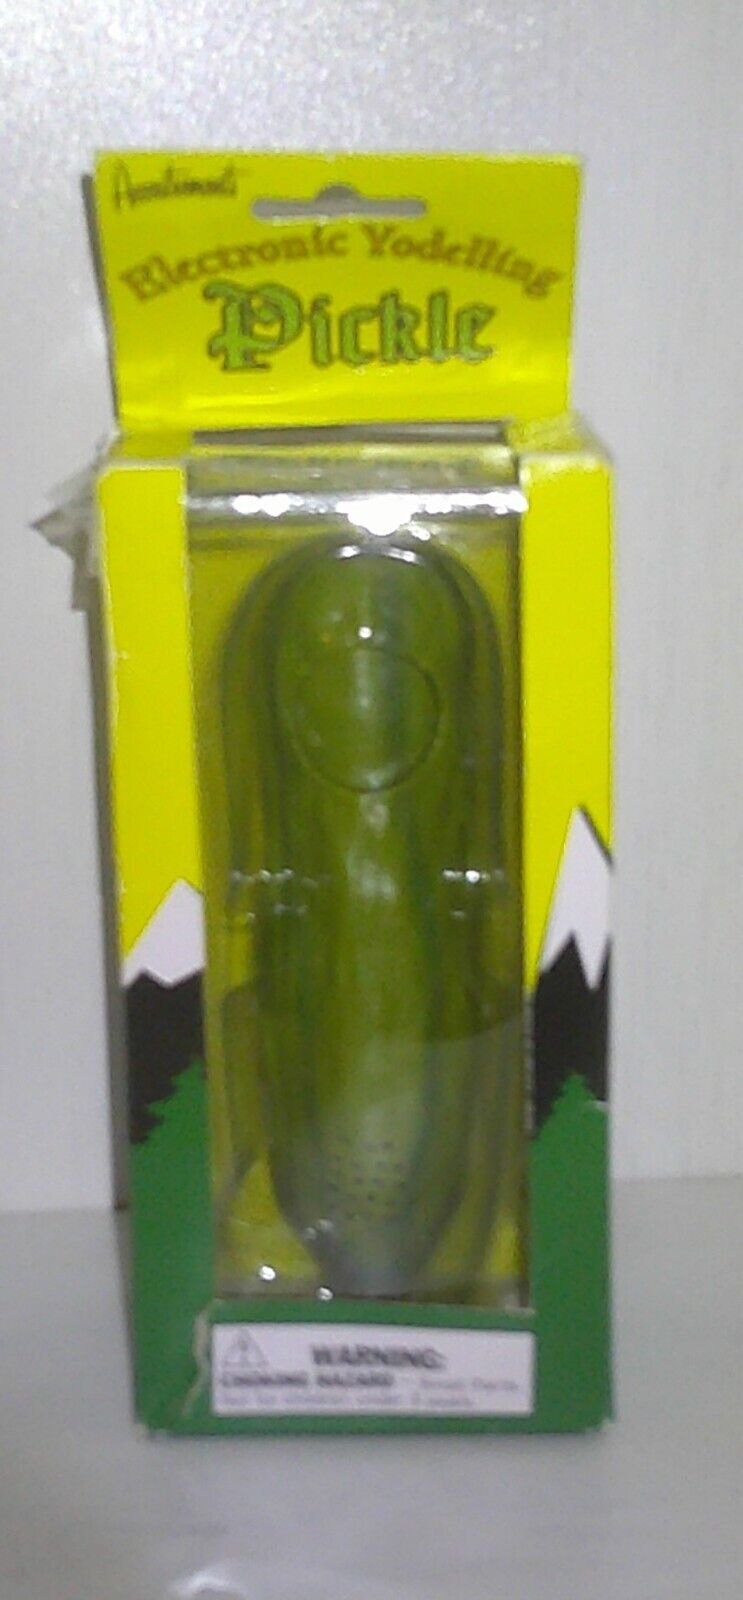 Electronic Yodelling Pickle - Gag Gift